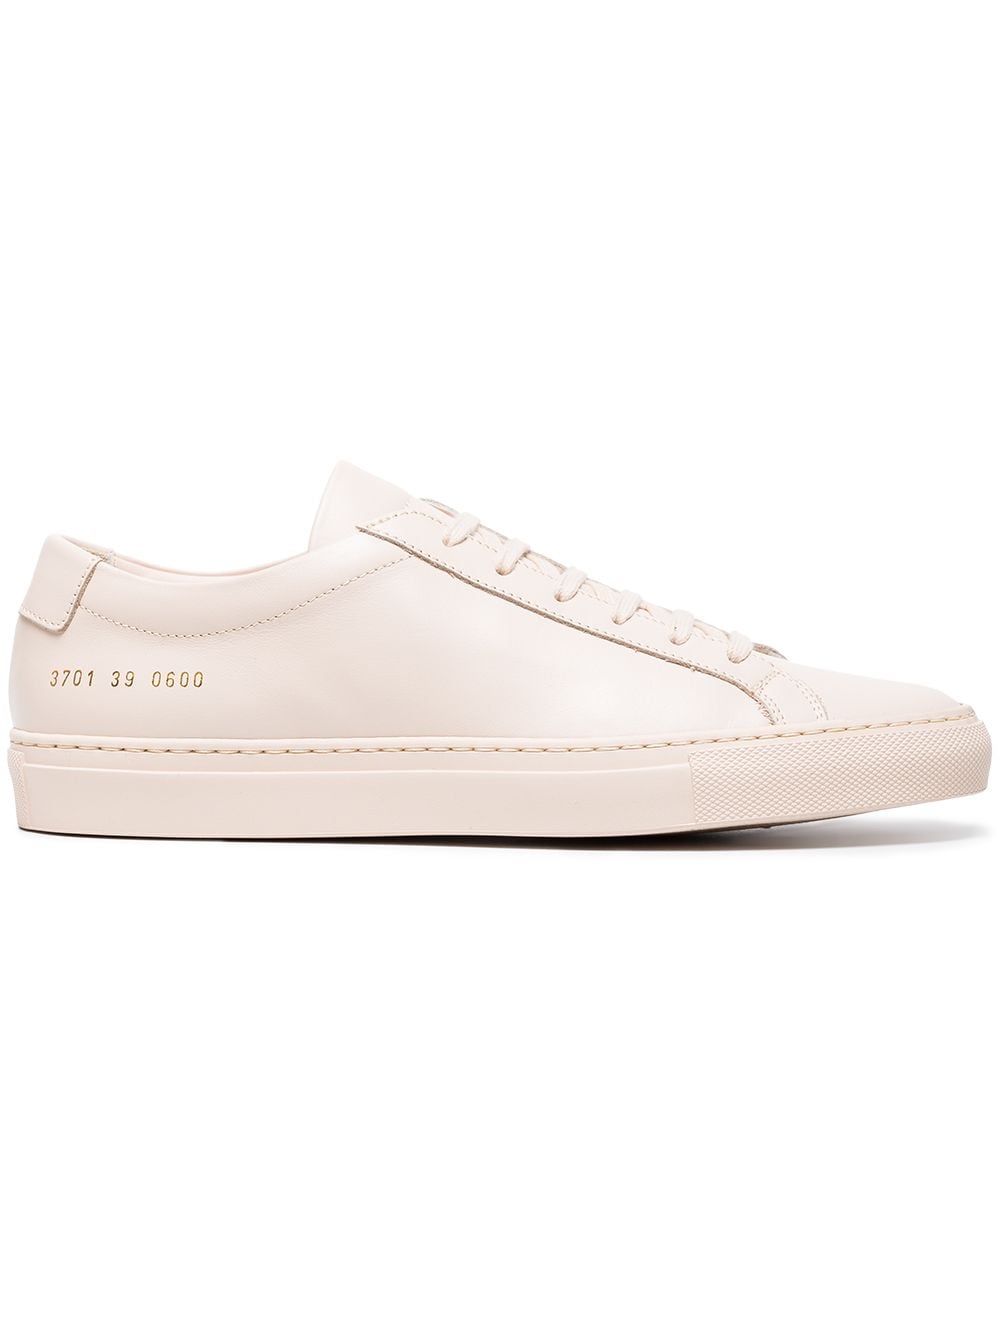 Achilles Low Leather Sneakers дамски обувки Common Projects 849793561_36